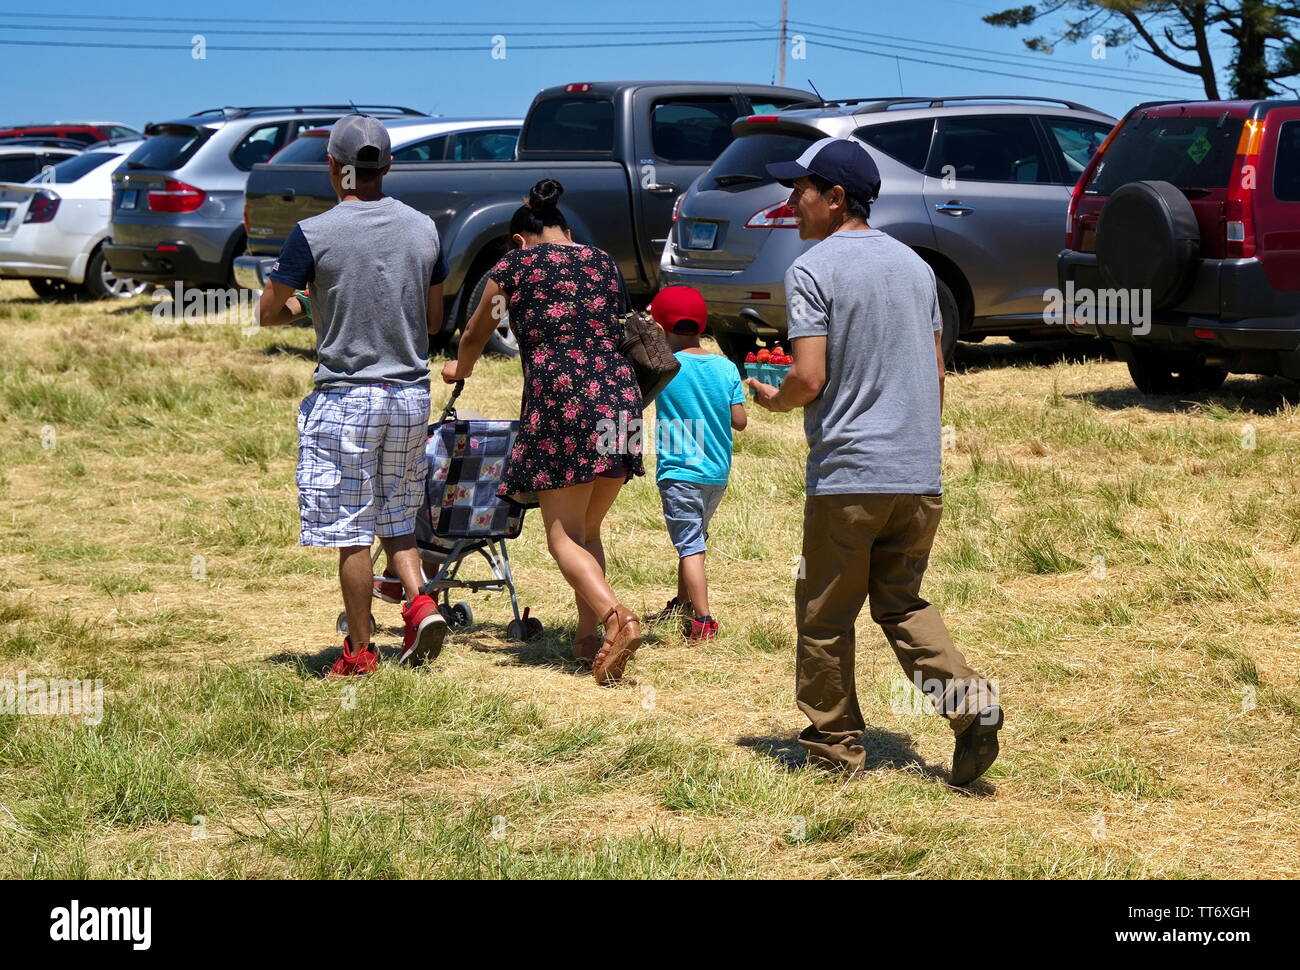 Middlefield, CT USA. Jun 2019. Hispanic family happily heading home with their delicious strawberries after an afternoon of fruit picking at a local o Stock Photo